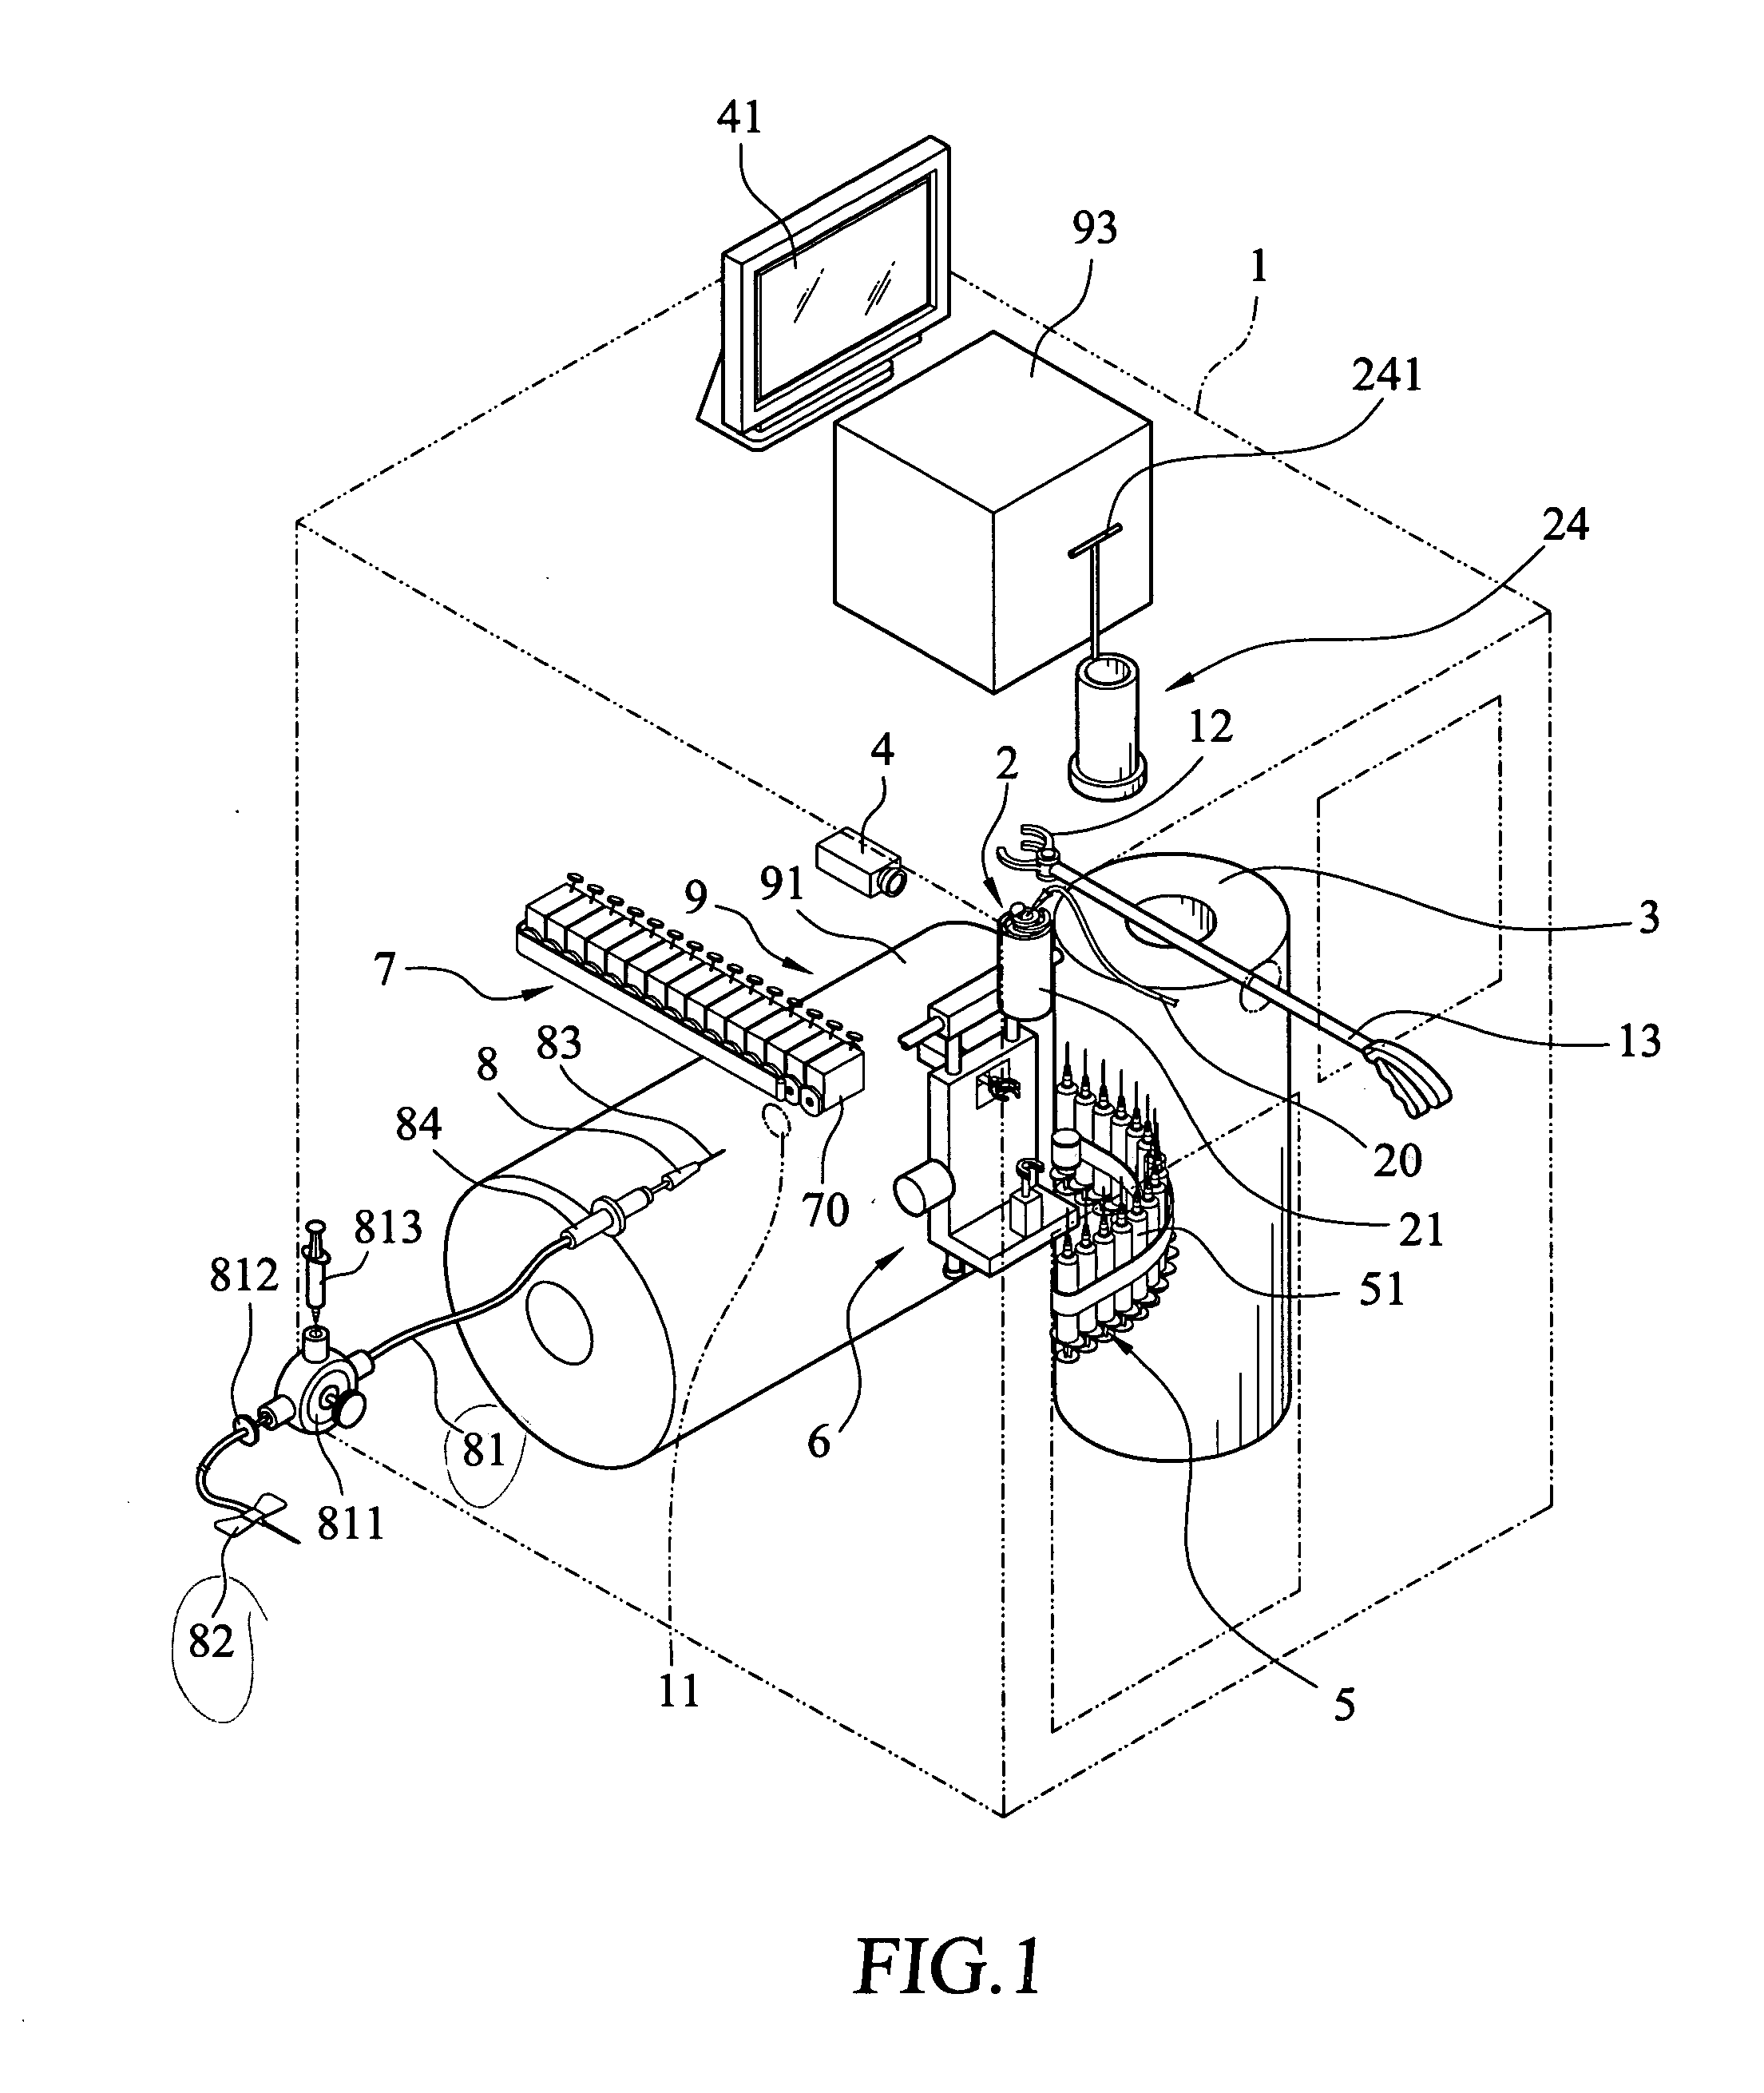 Dispensing and injection system for radiopharmaceuticals